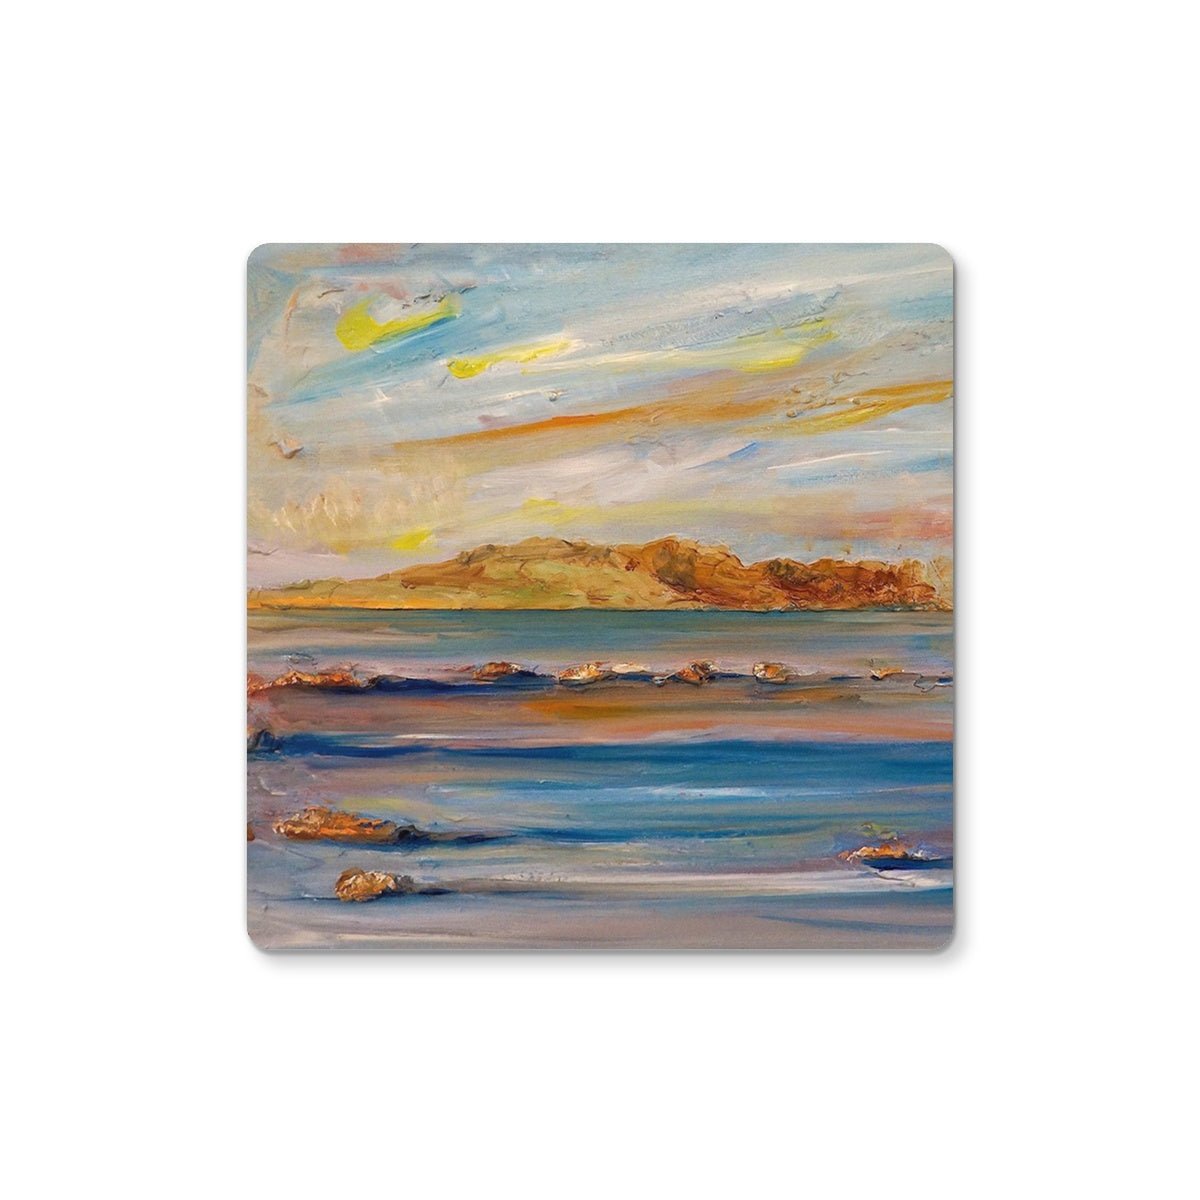 Tiree Dawn Art Gifts Coaster-Coasters-Hebridean Islands Art Gallery-2 Coasters-Paintings, Prints, Homeware, Art Gifts From Scotland By Scottish Artist Kevin Hunter